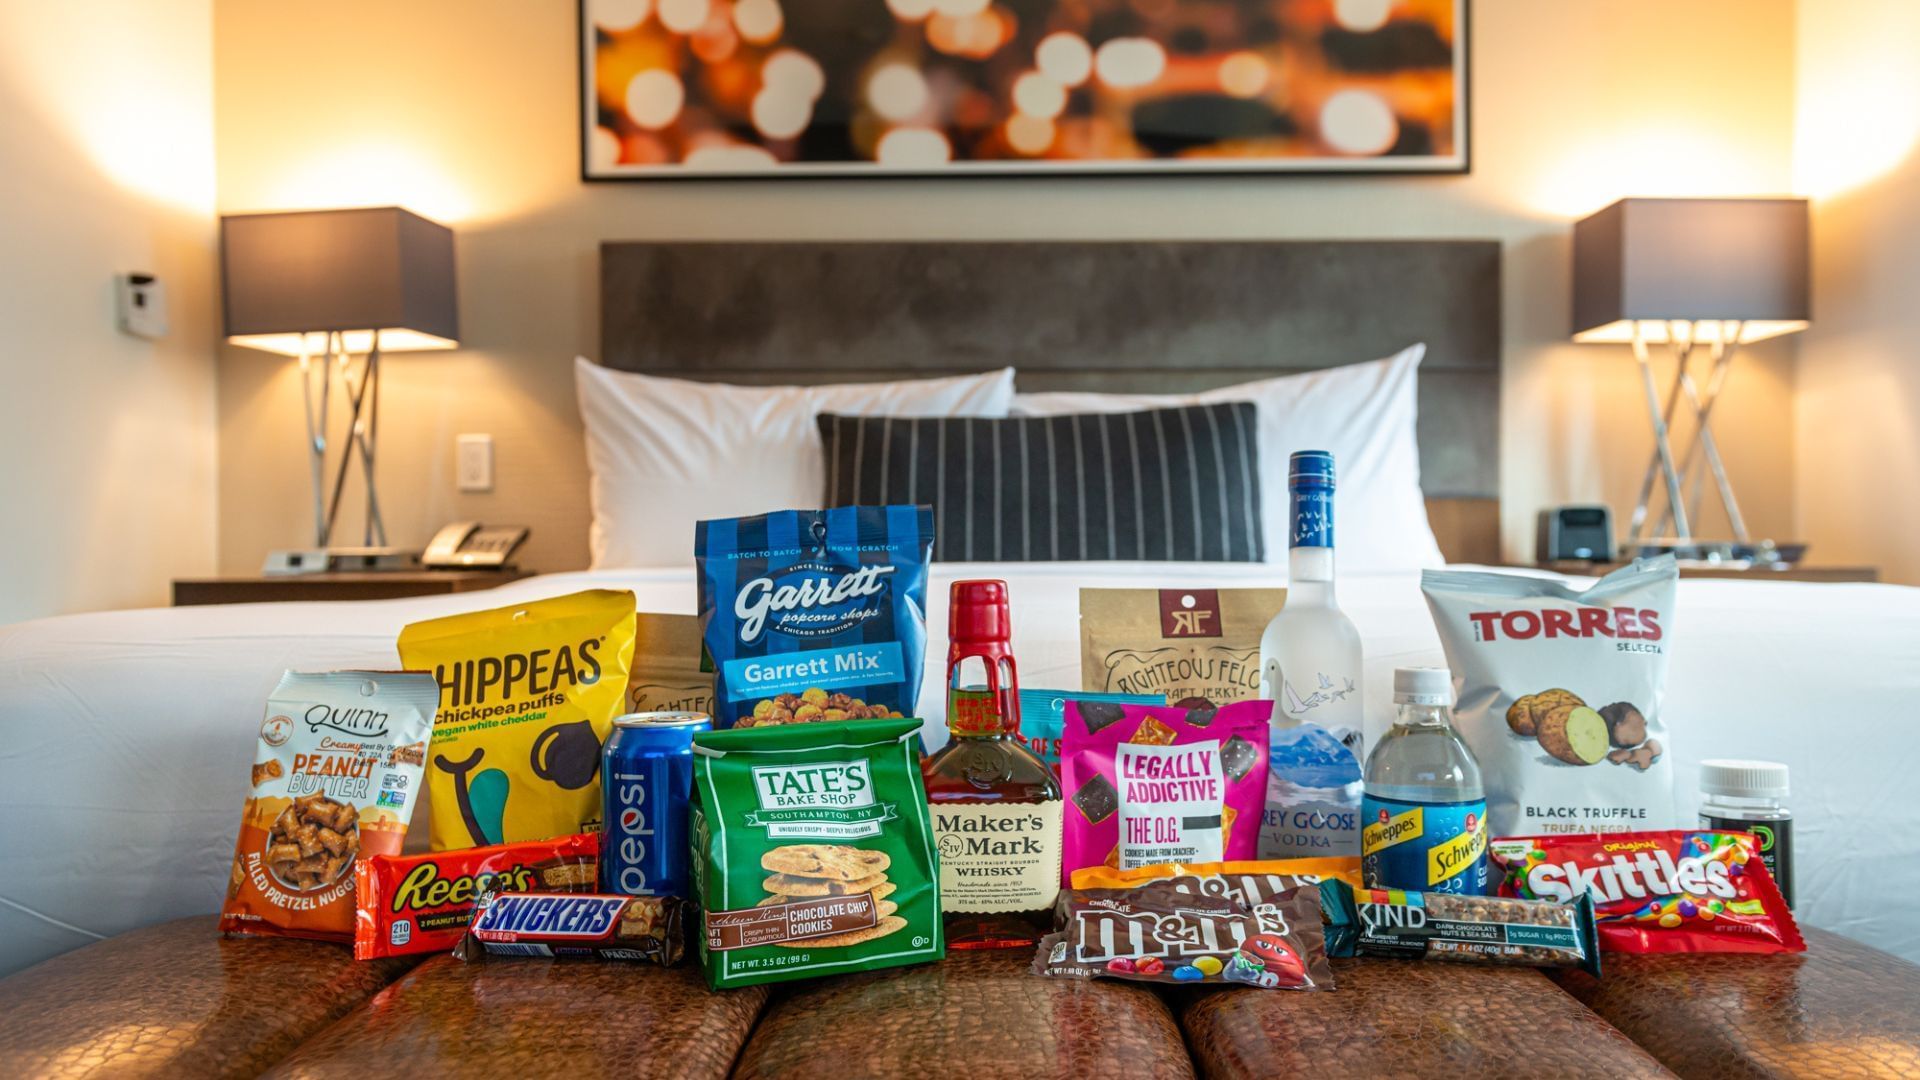 A variety of snacks and alcohol available to order for delivery to your room.